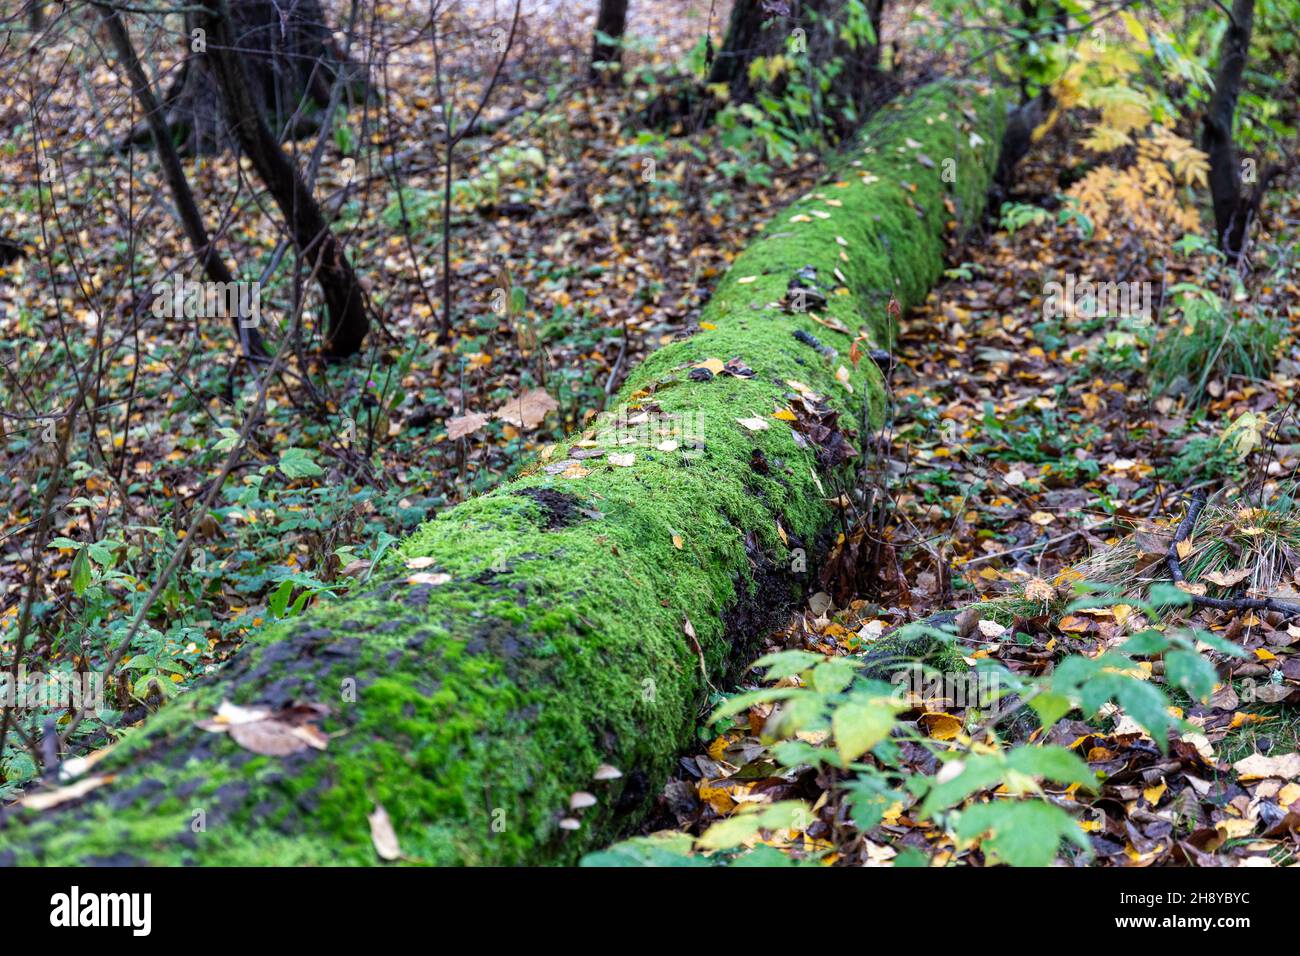 Mouldering tree trunk covered in moss with fallen leaves on the ground. Autumn of fall in Helsinki, Finland. Stock Photo